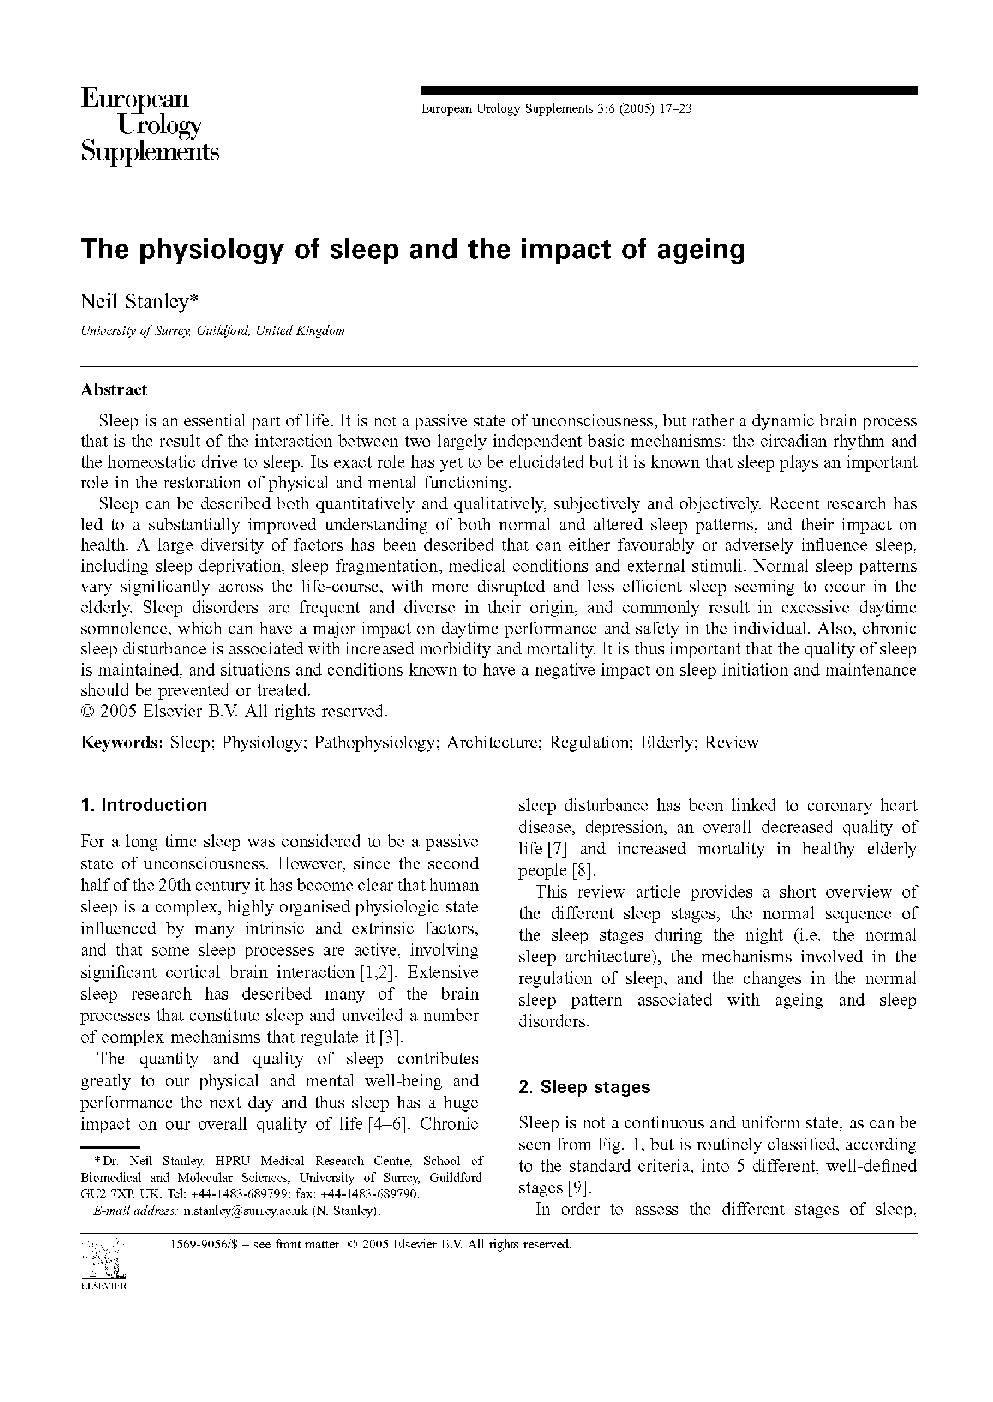 The physiology of sleep and the impact of ageing